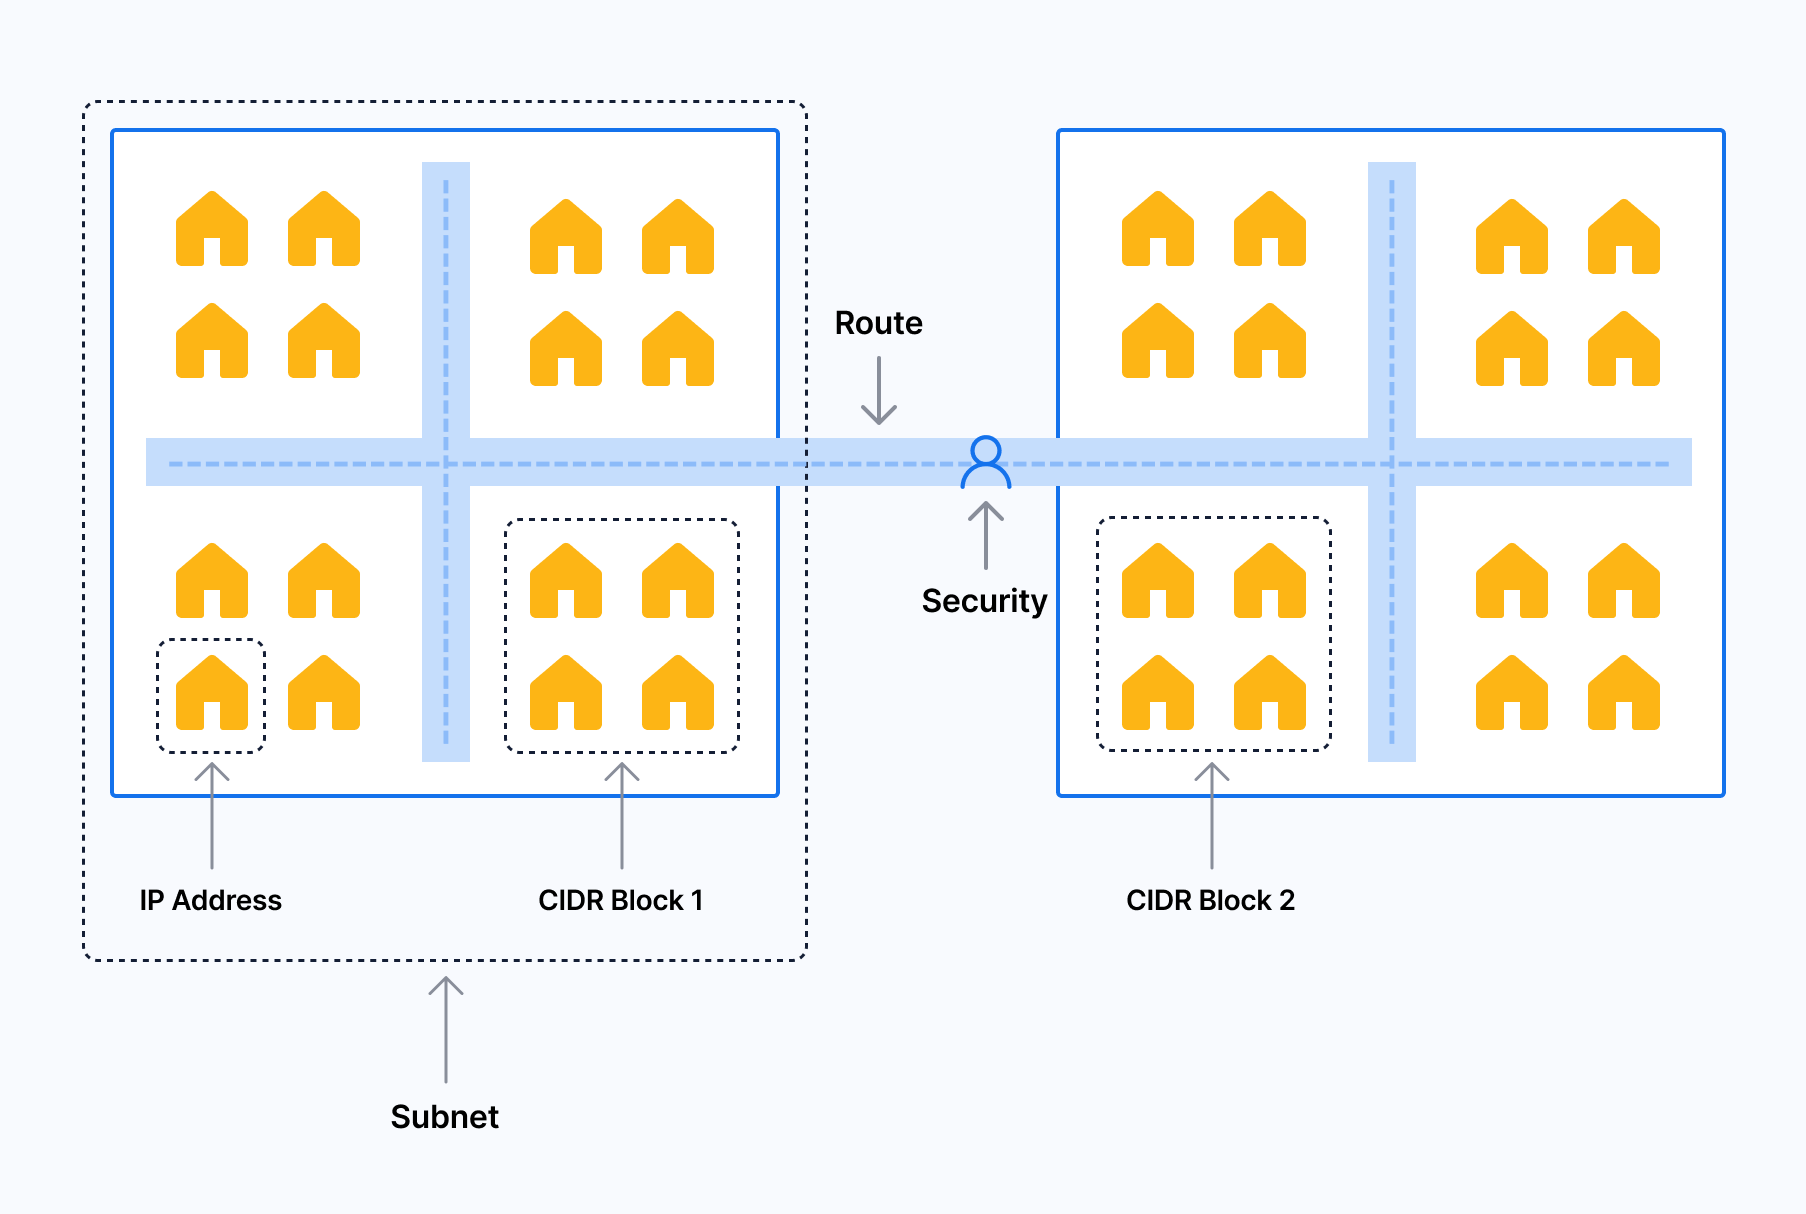 Using a city as an analogy, your IP address would be your postal address; the subnet would be your city and country code, and CIDR would be your area code. Via routing, we pick the desirable route from one IP address to another. 